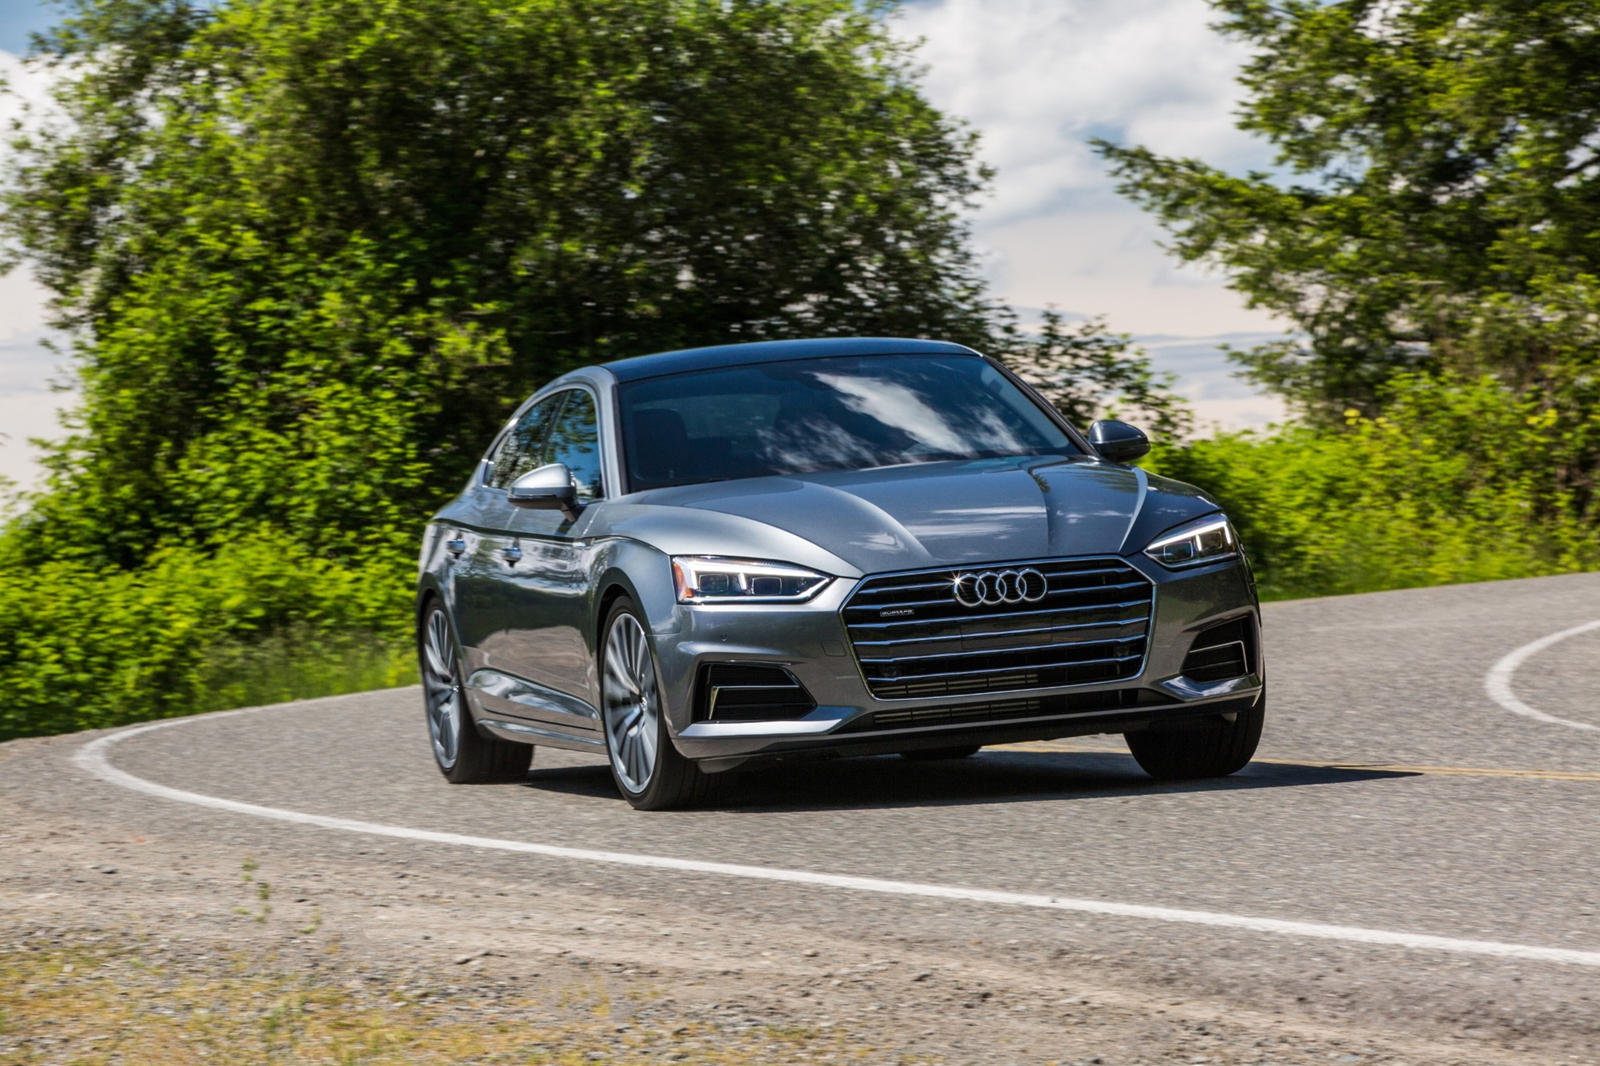 2019 Audi A5 Sportback Front View Driving